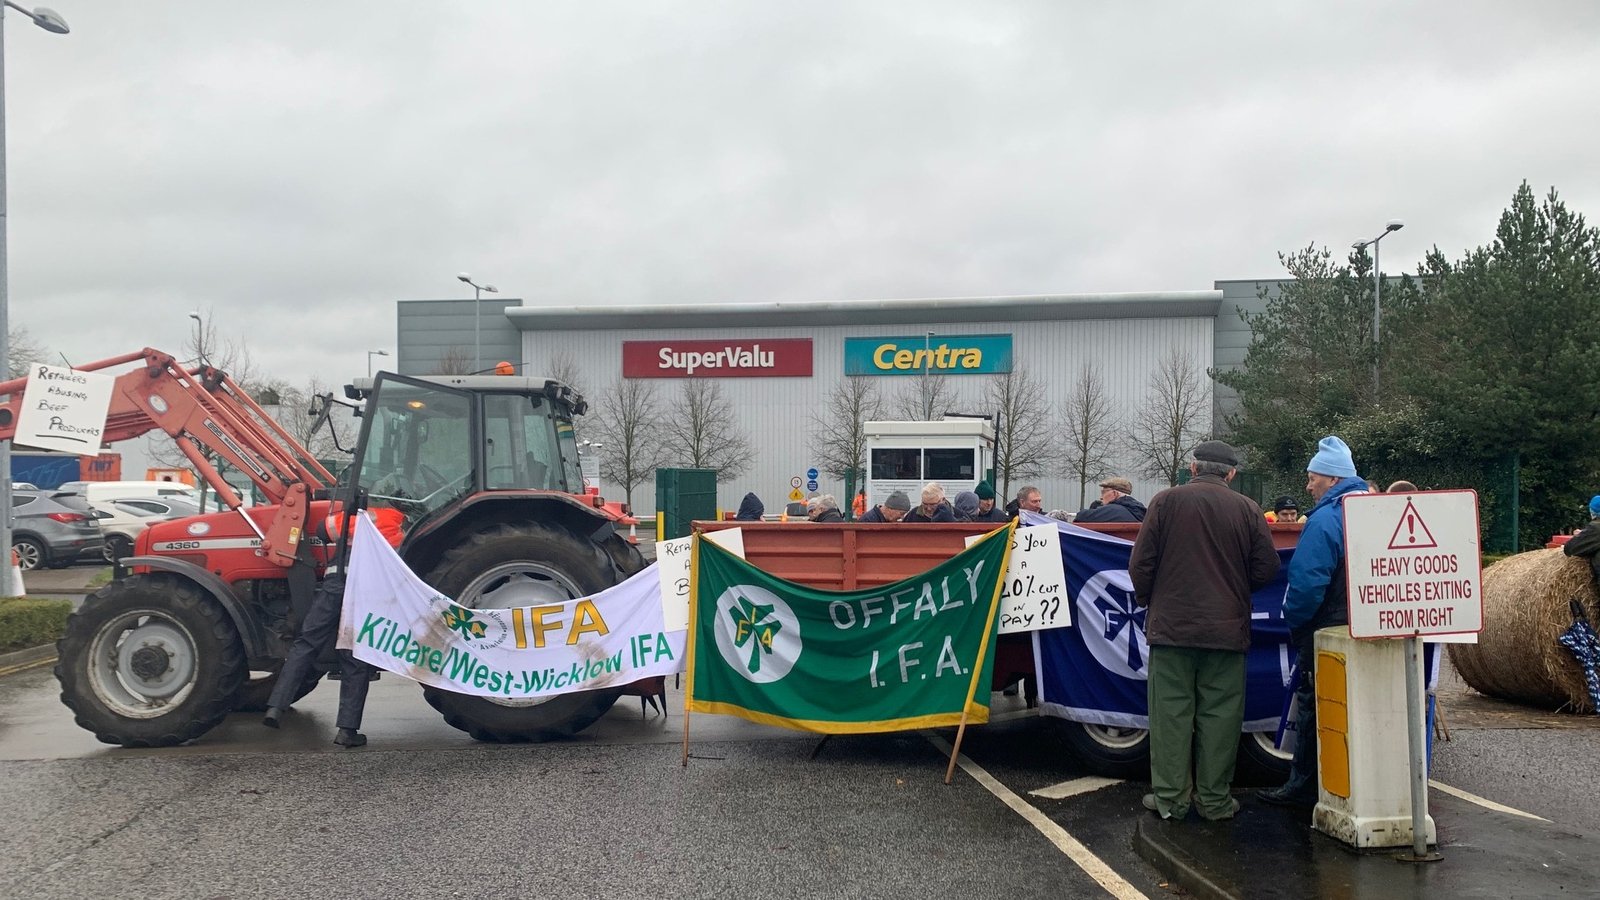 Irish Farmers have Gathered to Block the Musgraves Central Distribution Centre in Co Kildare